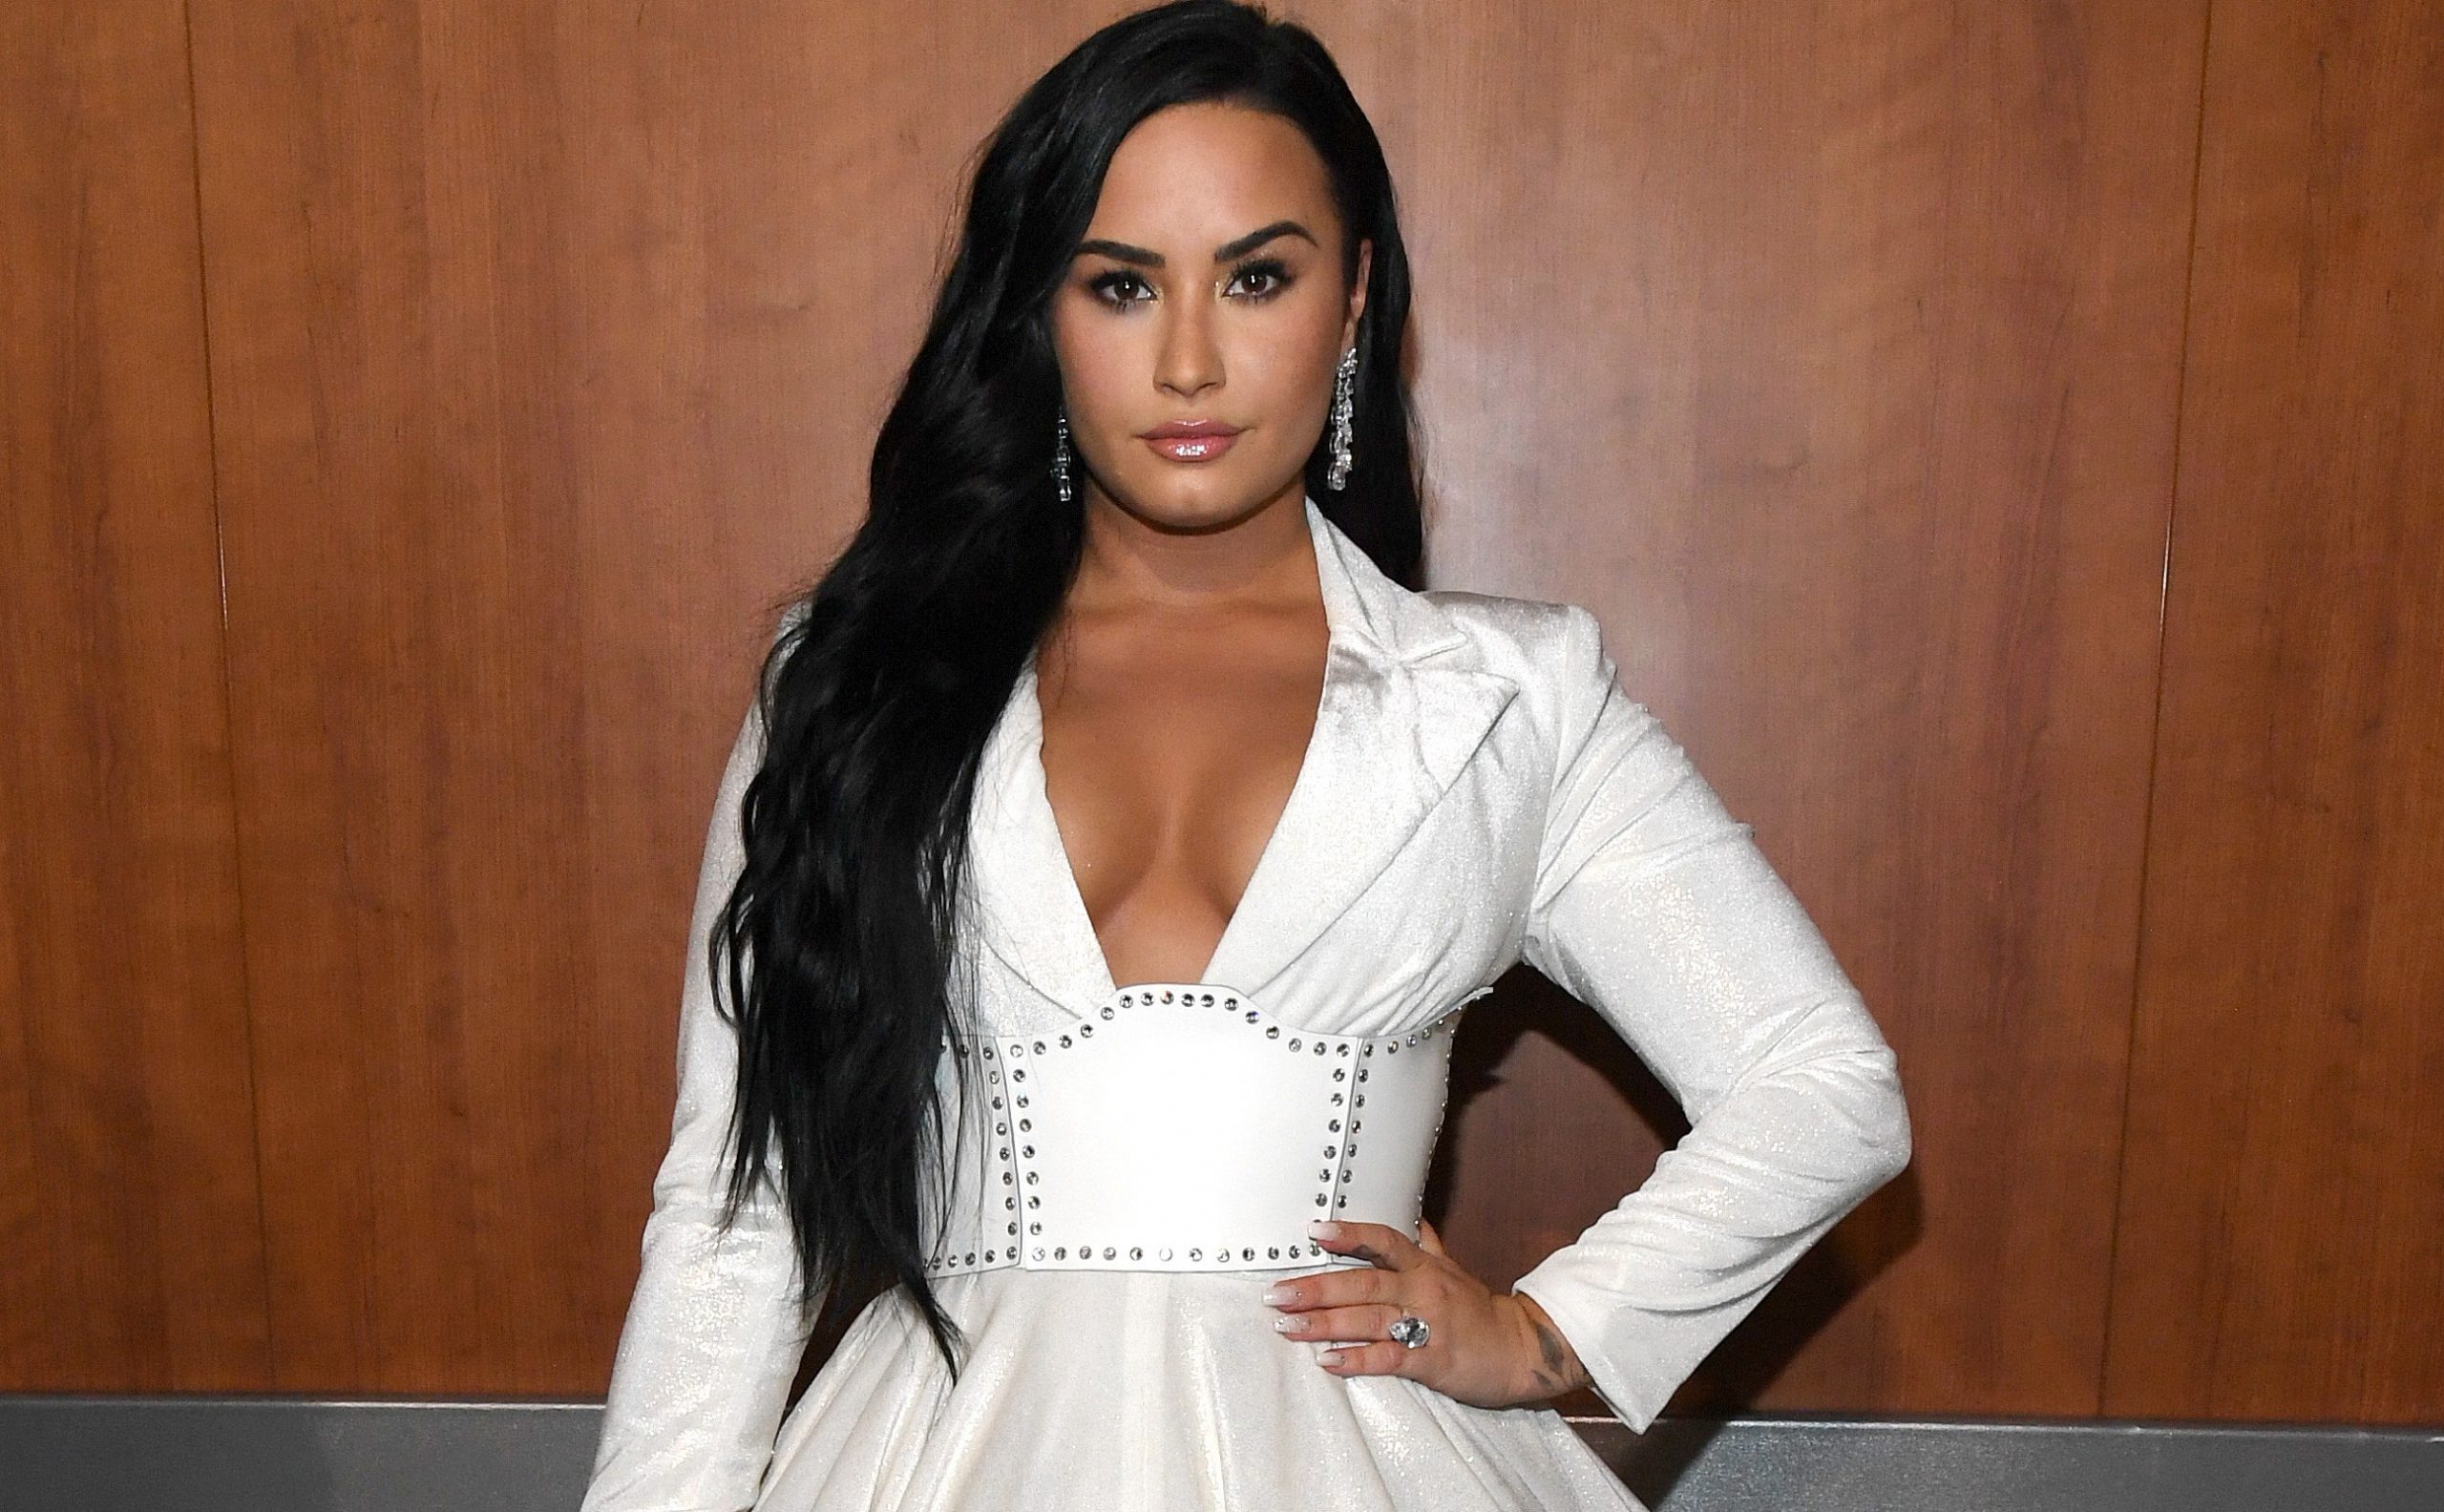 Demi Lovato returns to modeling sportswear, showing off her curves in tight leggings